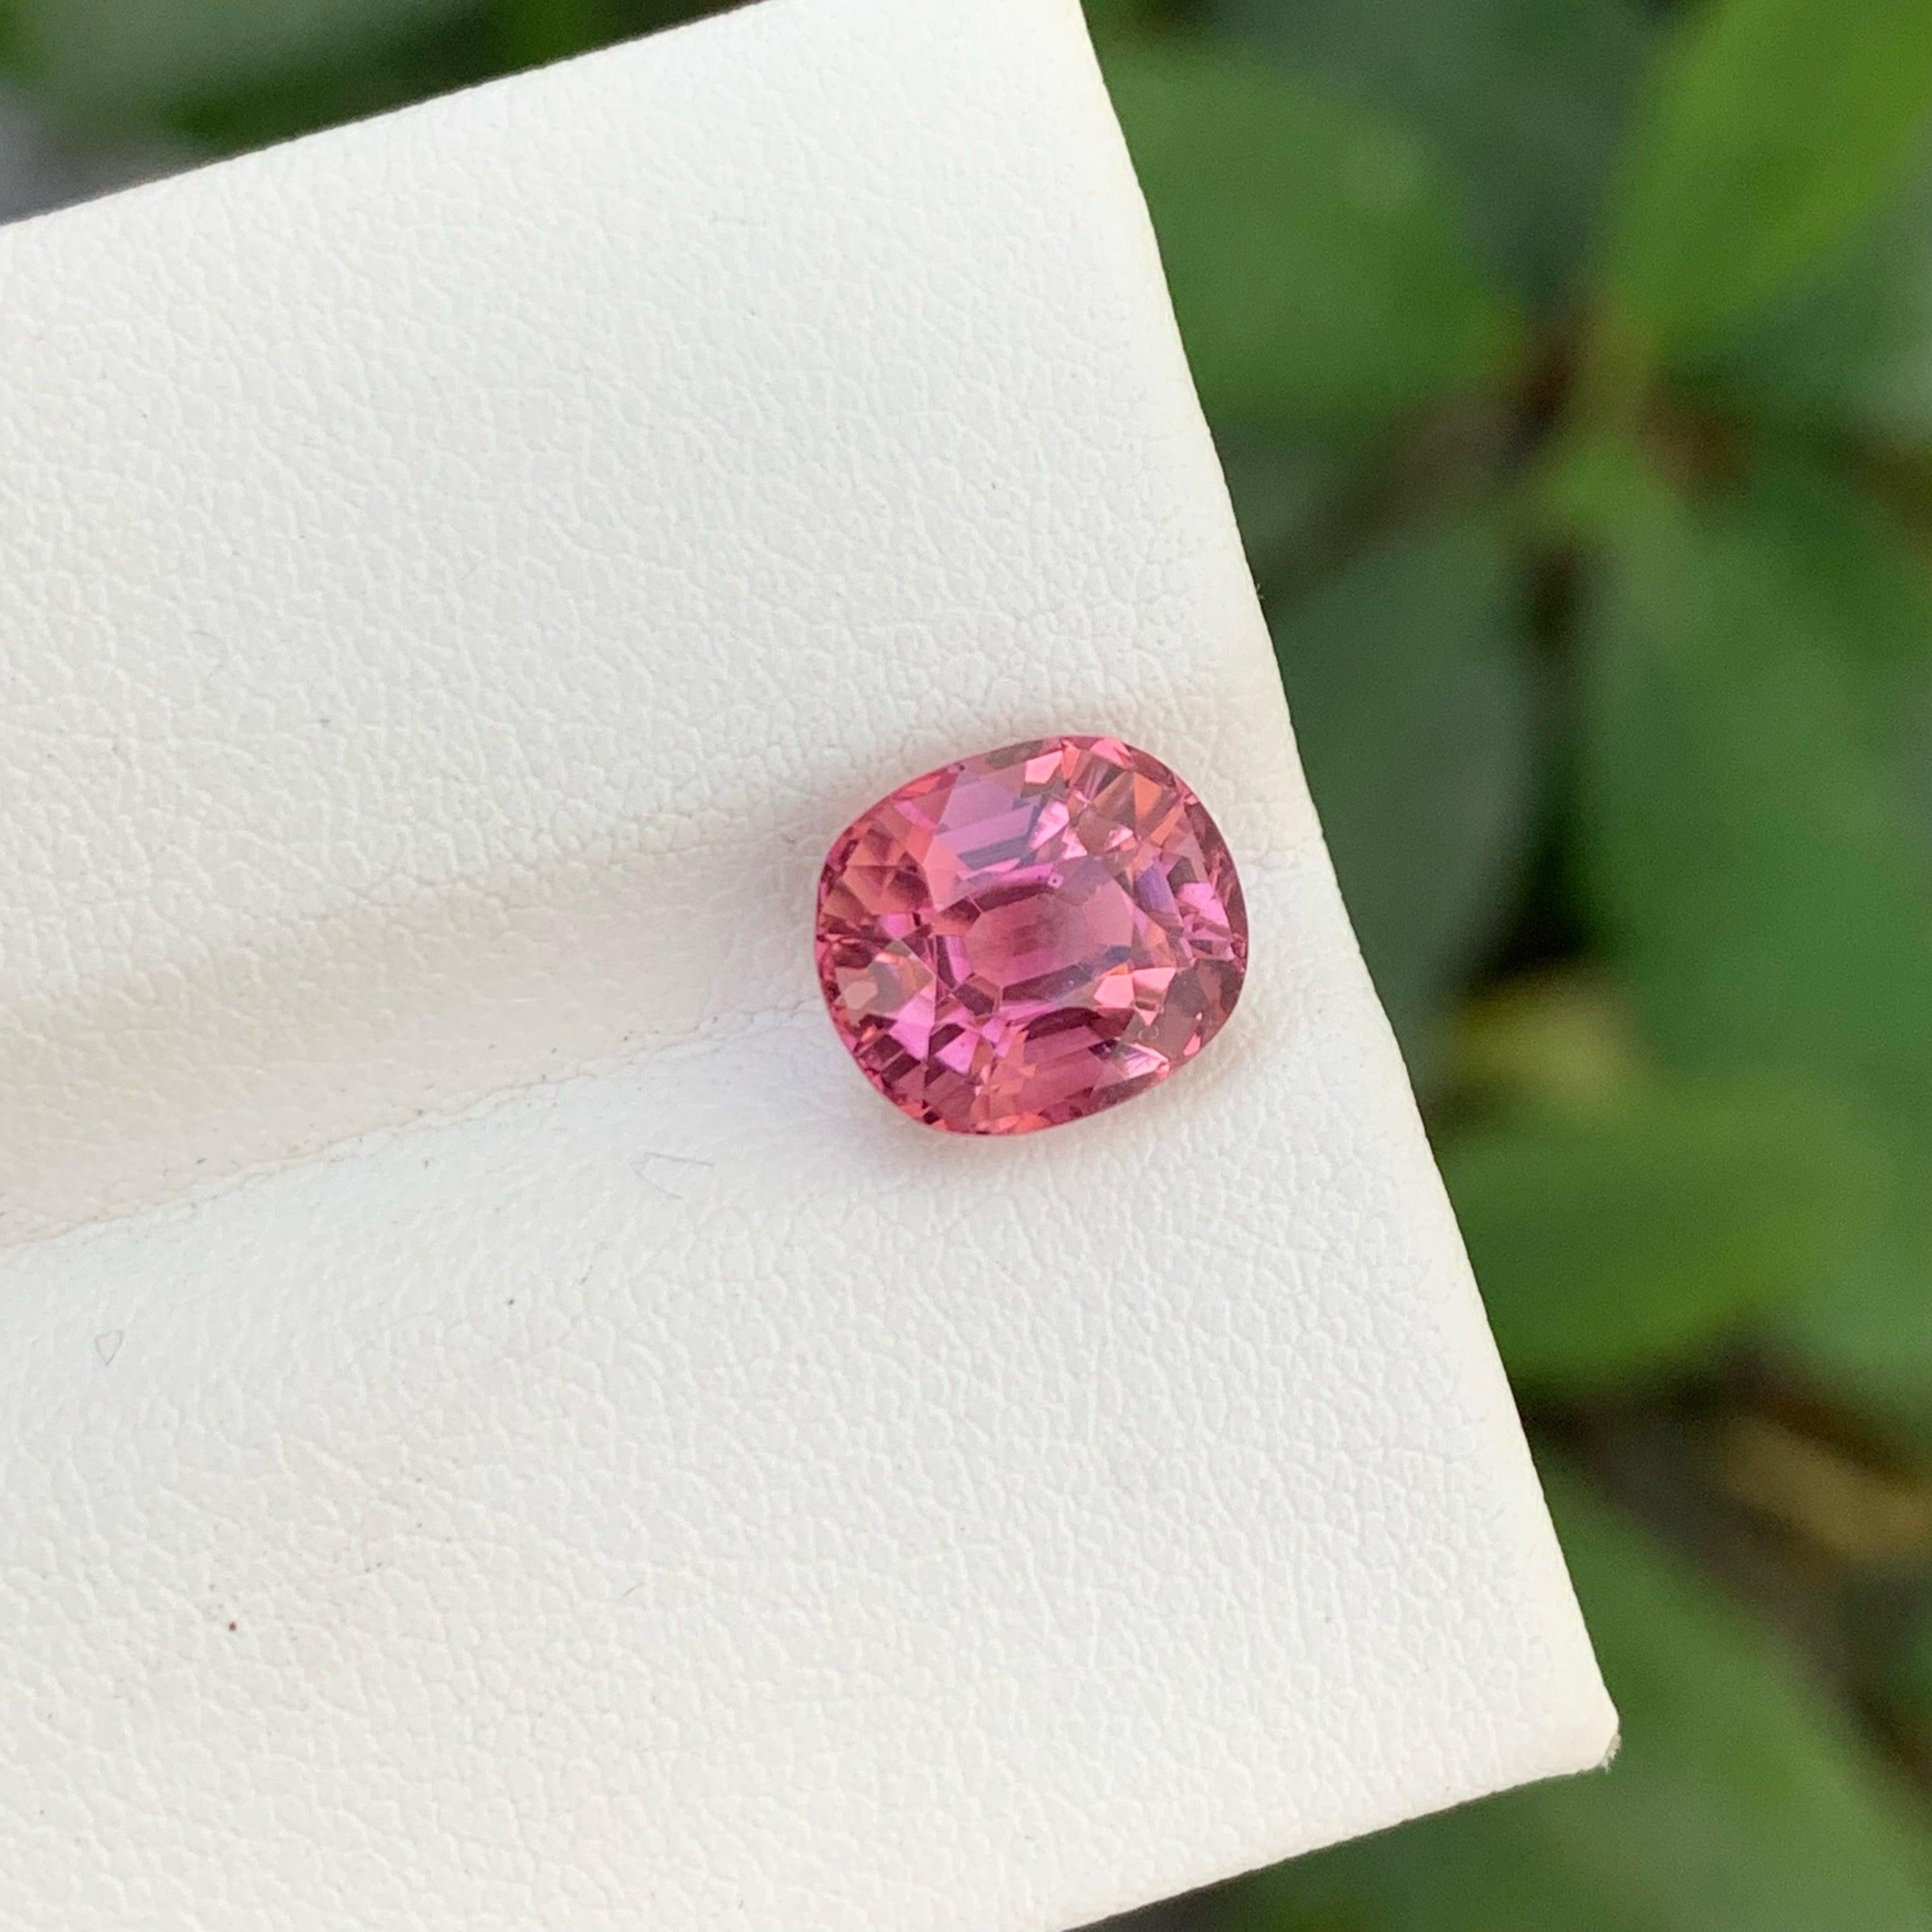 Gorgeous Natural Pink Tourmaline Gemstone, Available For Sale At Wholesale Price Natural High Quality 3.40 Carats Eye Clean Clarity Natural Loose Tourmaline From Afghanistan.

GEMSTONE TYPE:	Gorgeous Natural Pink Tourmaline Gemstone
WEIGHT:	3.40